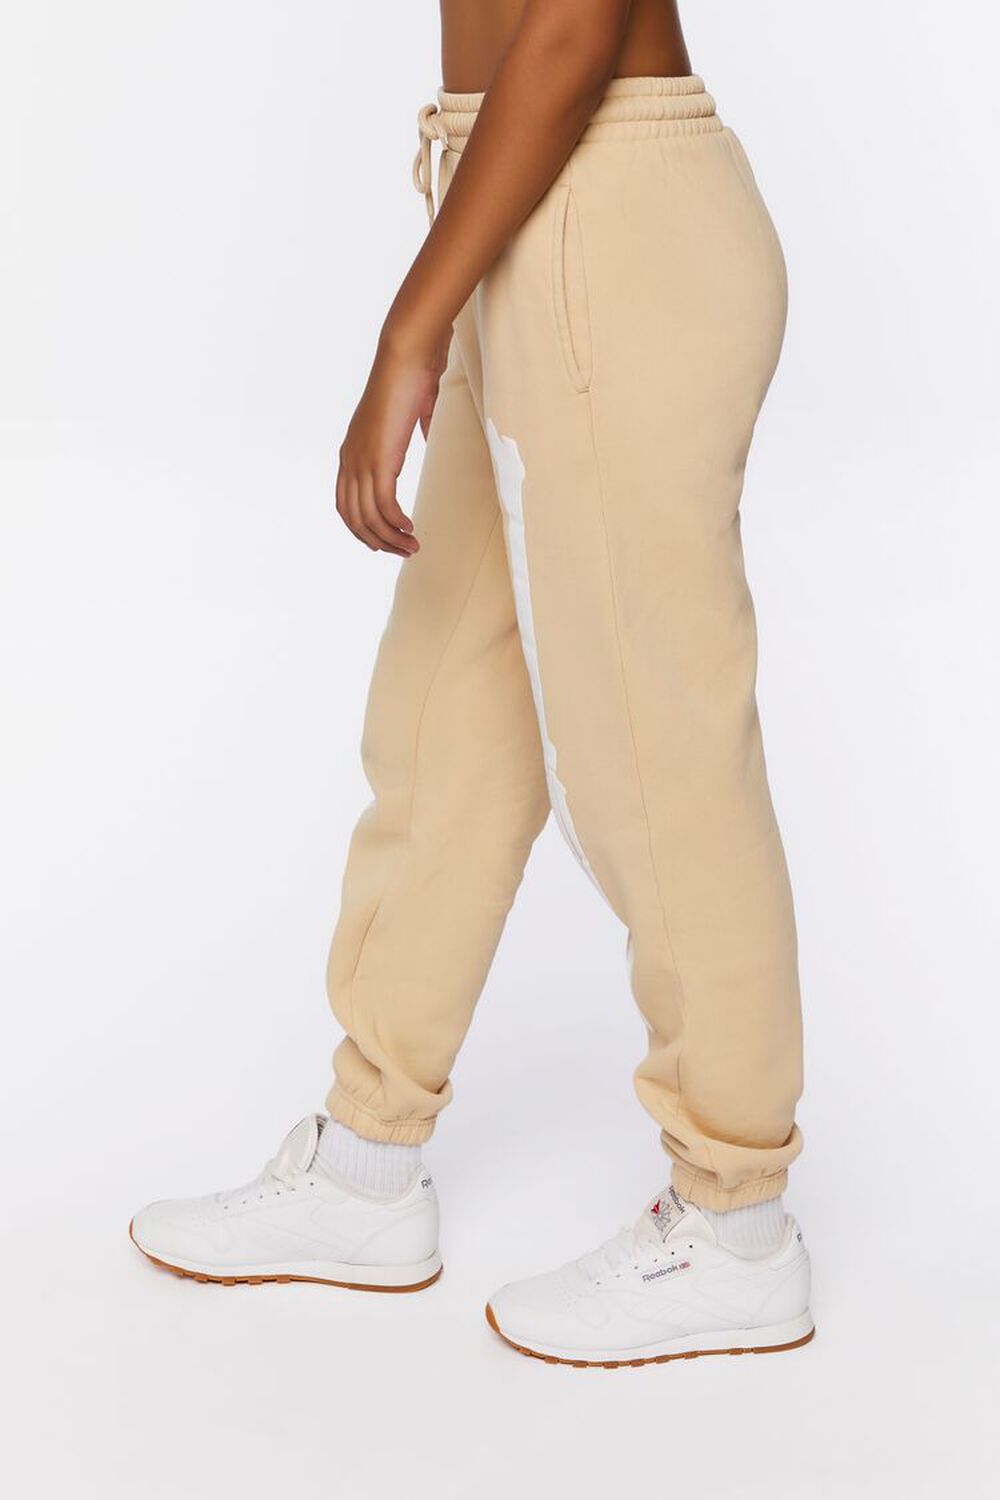 TAUPE/WHITE Skeleton Graphic Joggers, image 3